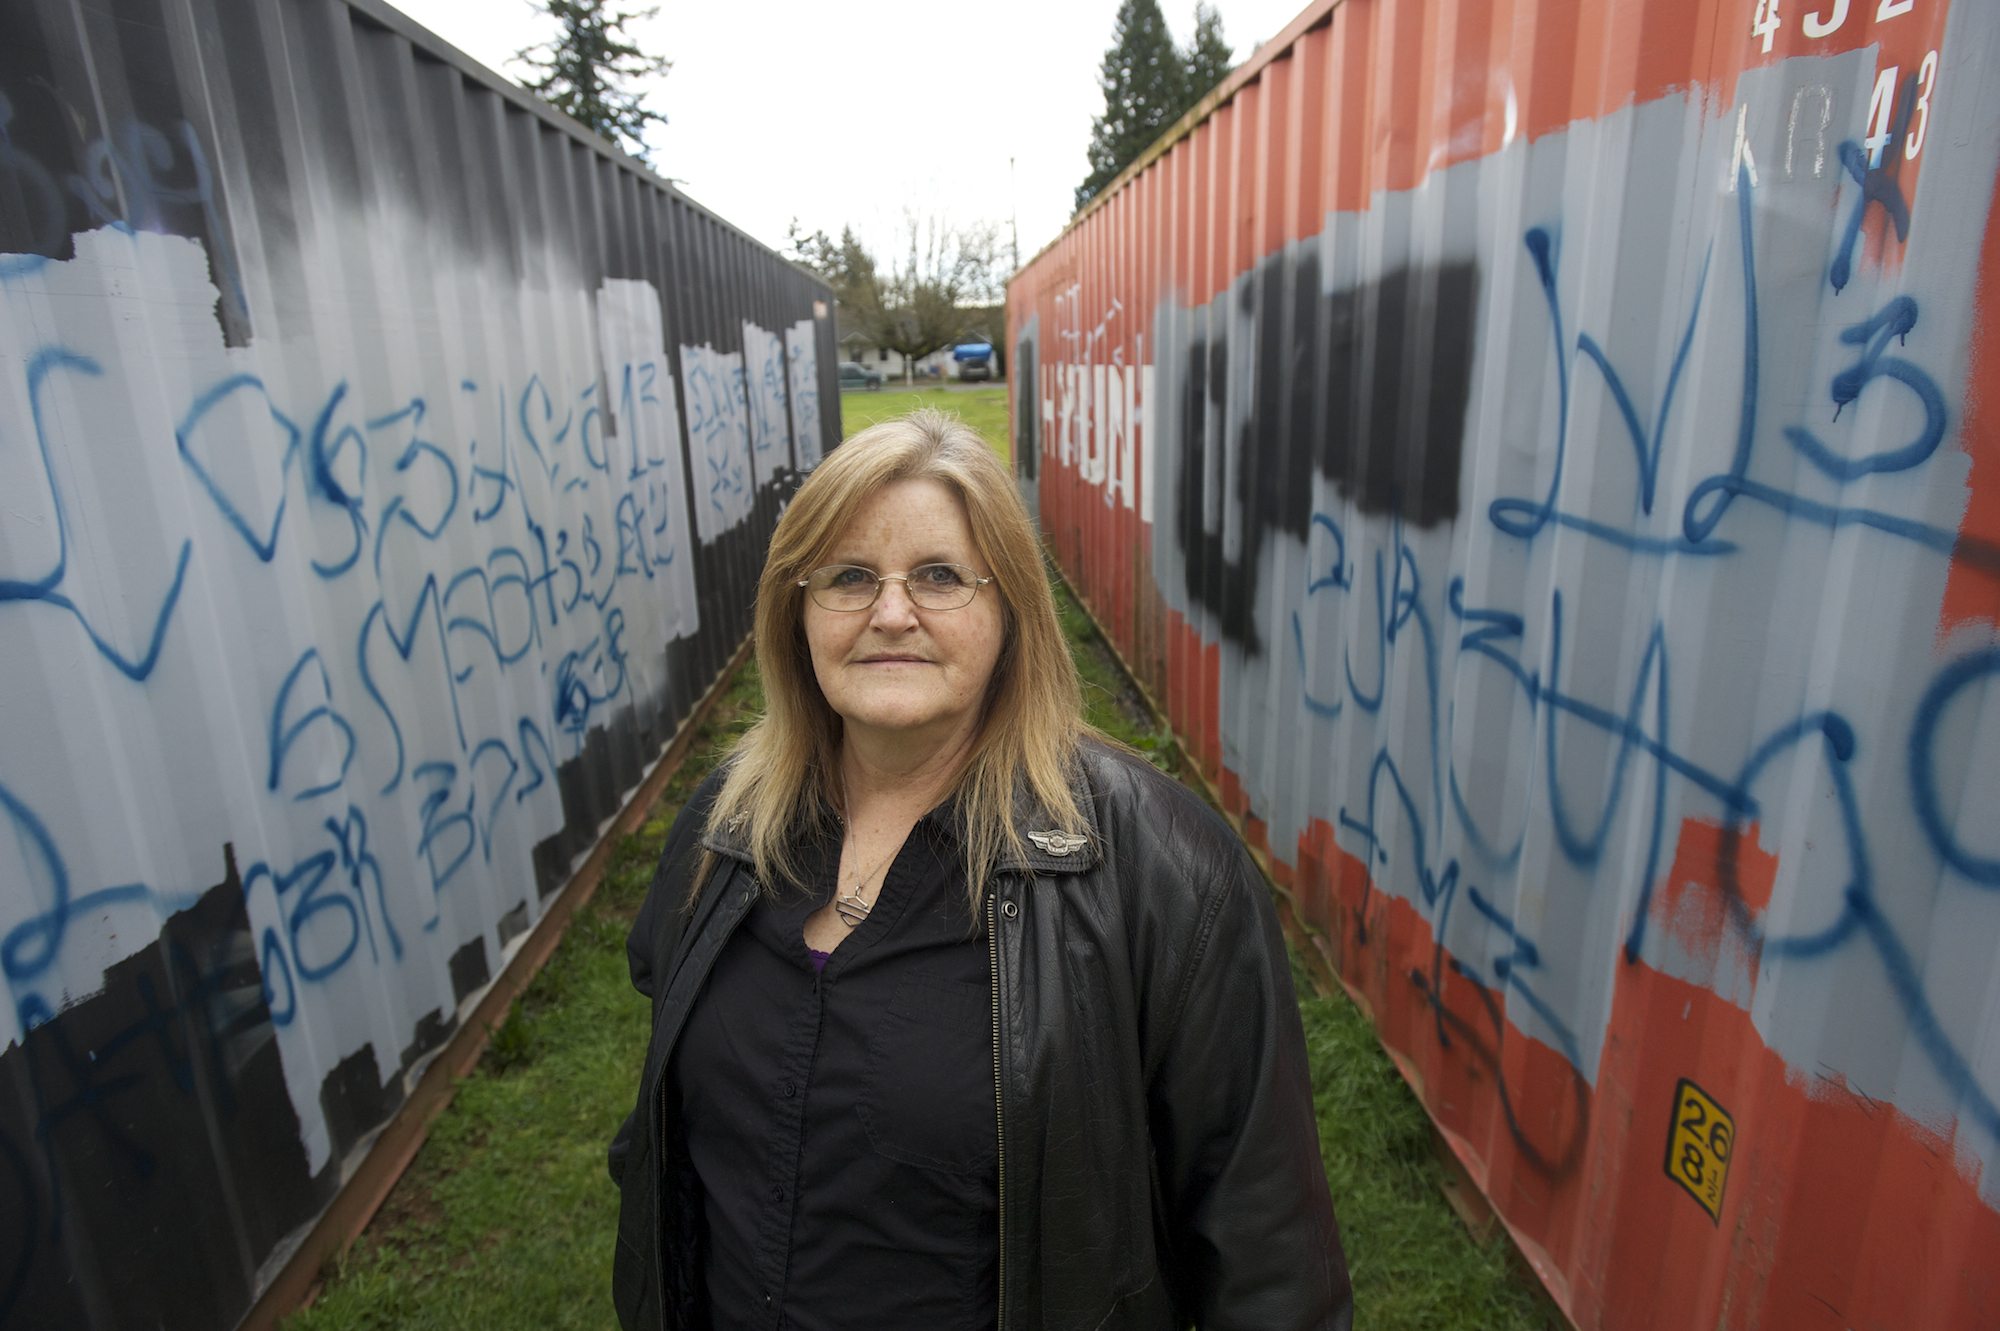 Cynthia Powers stands amid graffiti-covered shipping containers Thursday afternoon at Warrior Field in Vancouver.